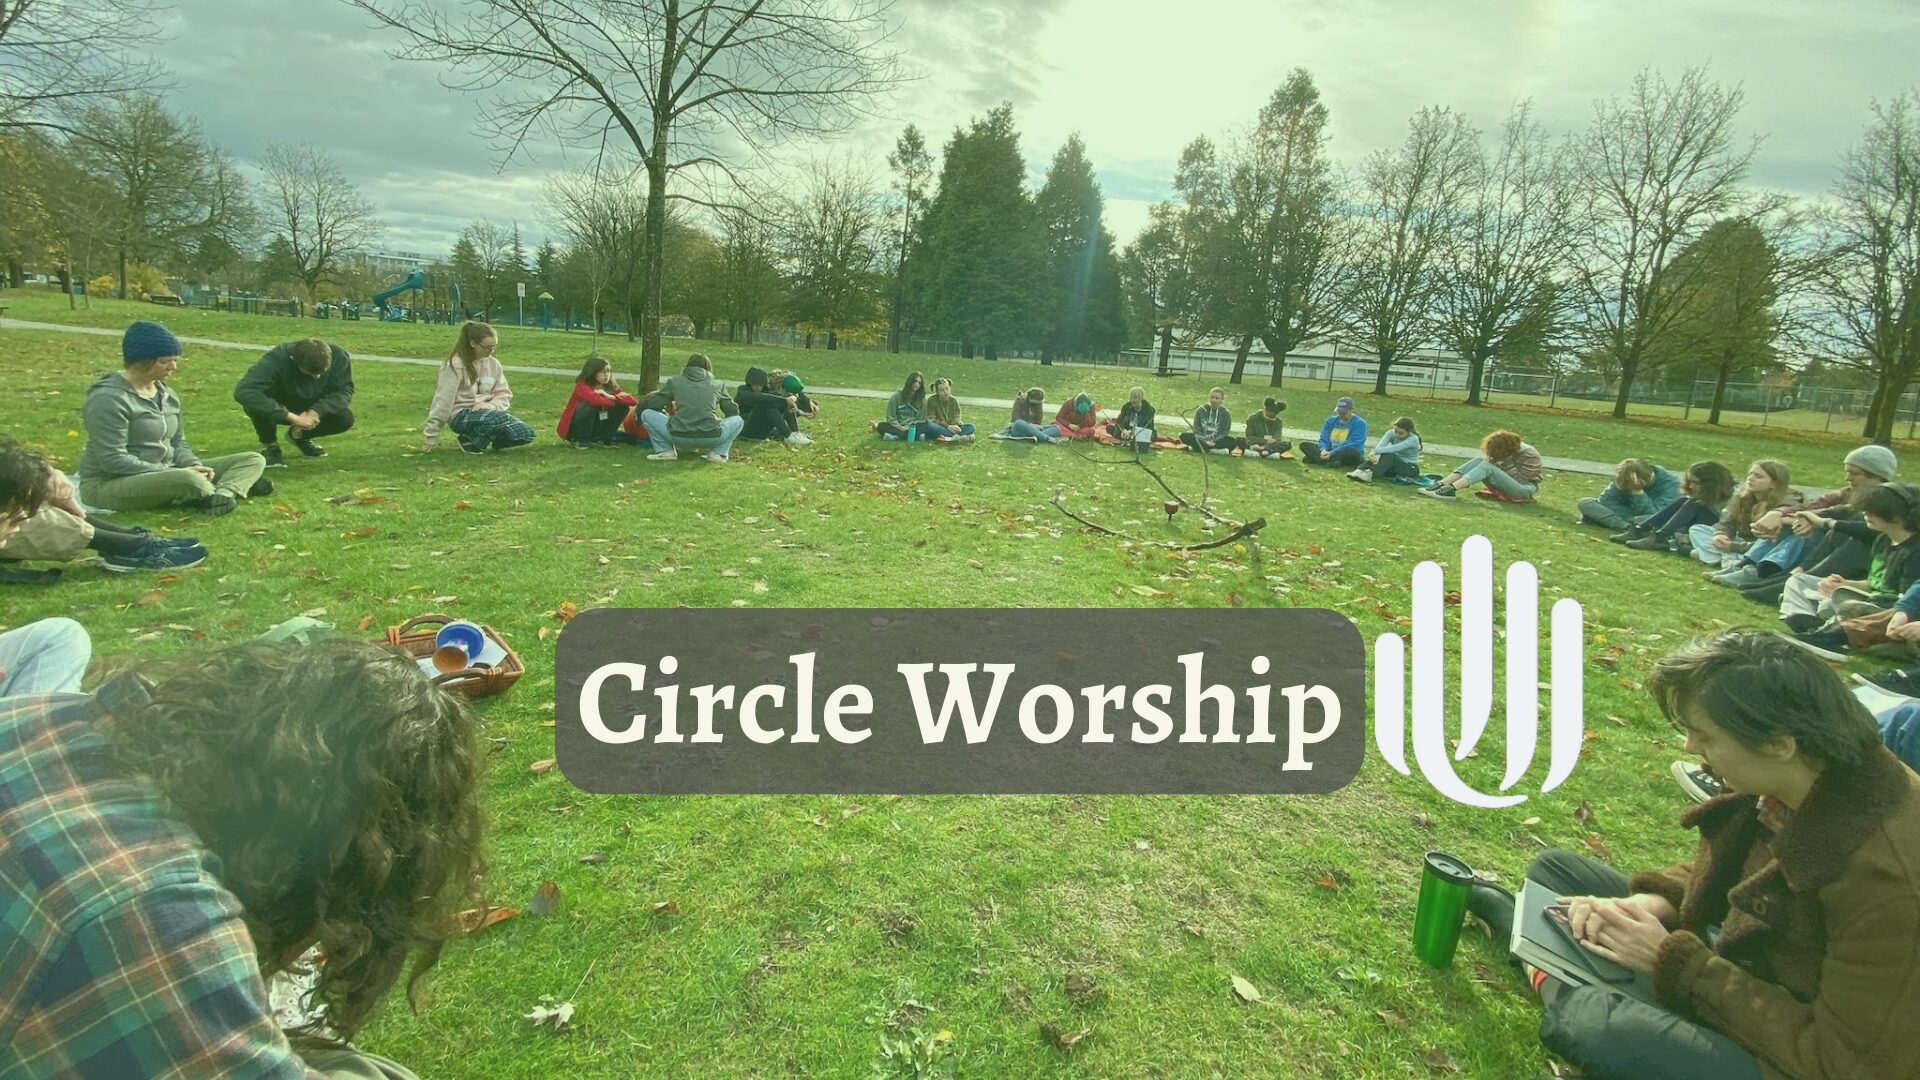 A circle of people sitting on the grass in a park with a chalice lit in the centre. Text reads "Circle Worship"